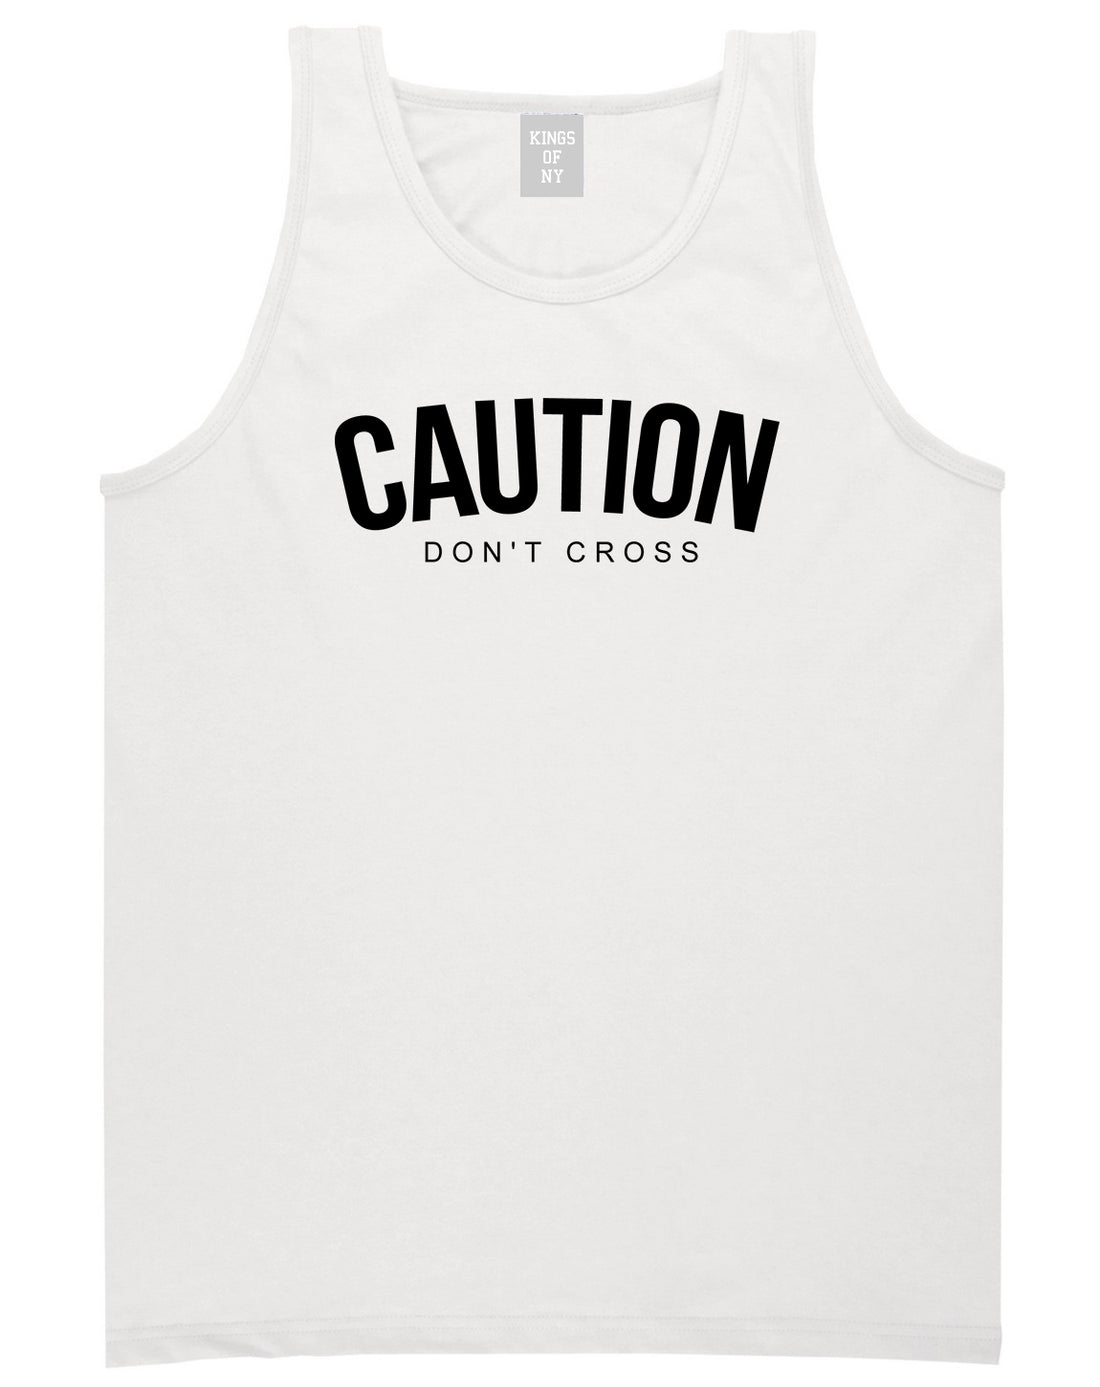 Caution Dont Cross Mens Tank Top Shirt White by Kings Of NY